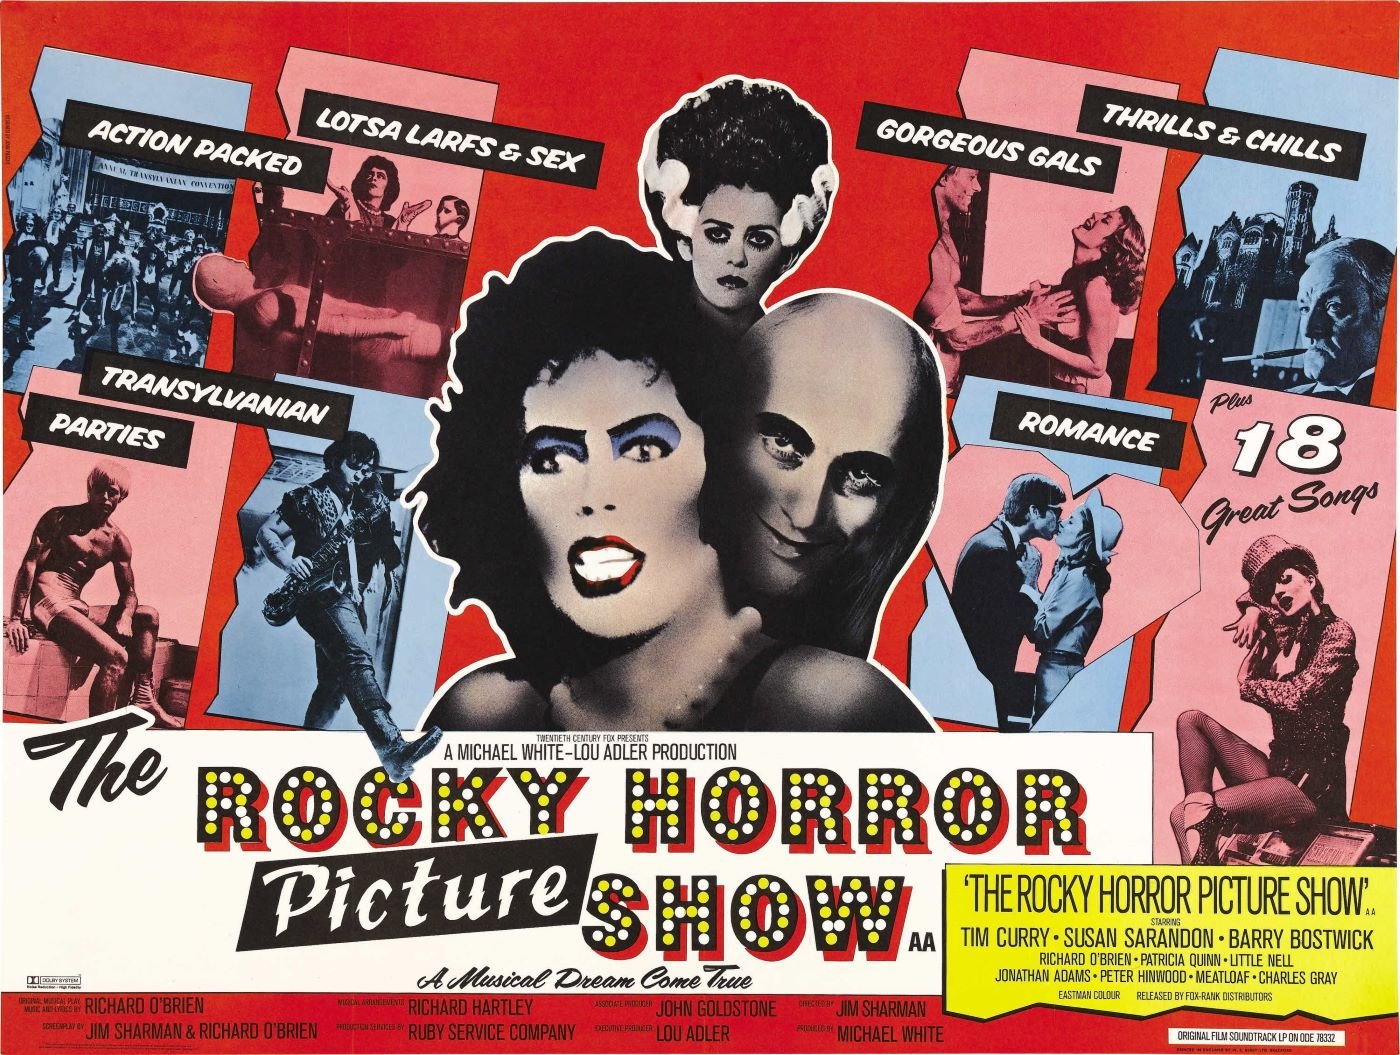 A movie poster of 'Rocky Horror Picture Show' illustrating the characters in a comic book style all throughout the page using vibrant reds, pinks, and soft blues.